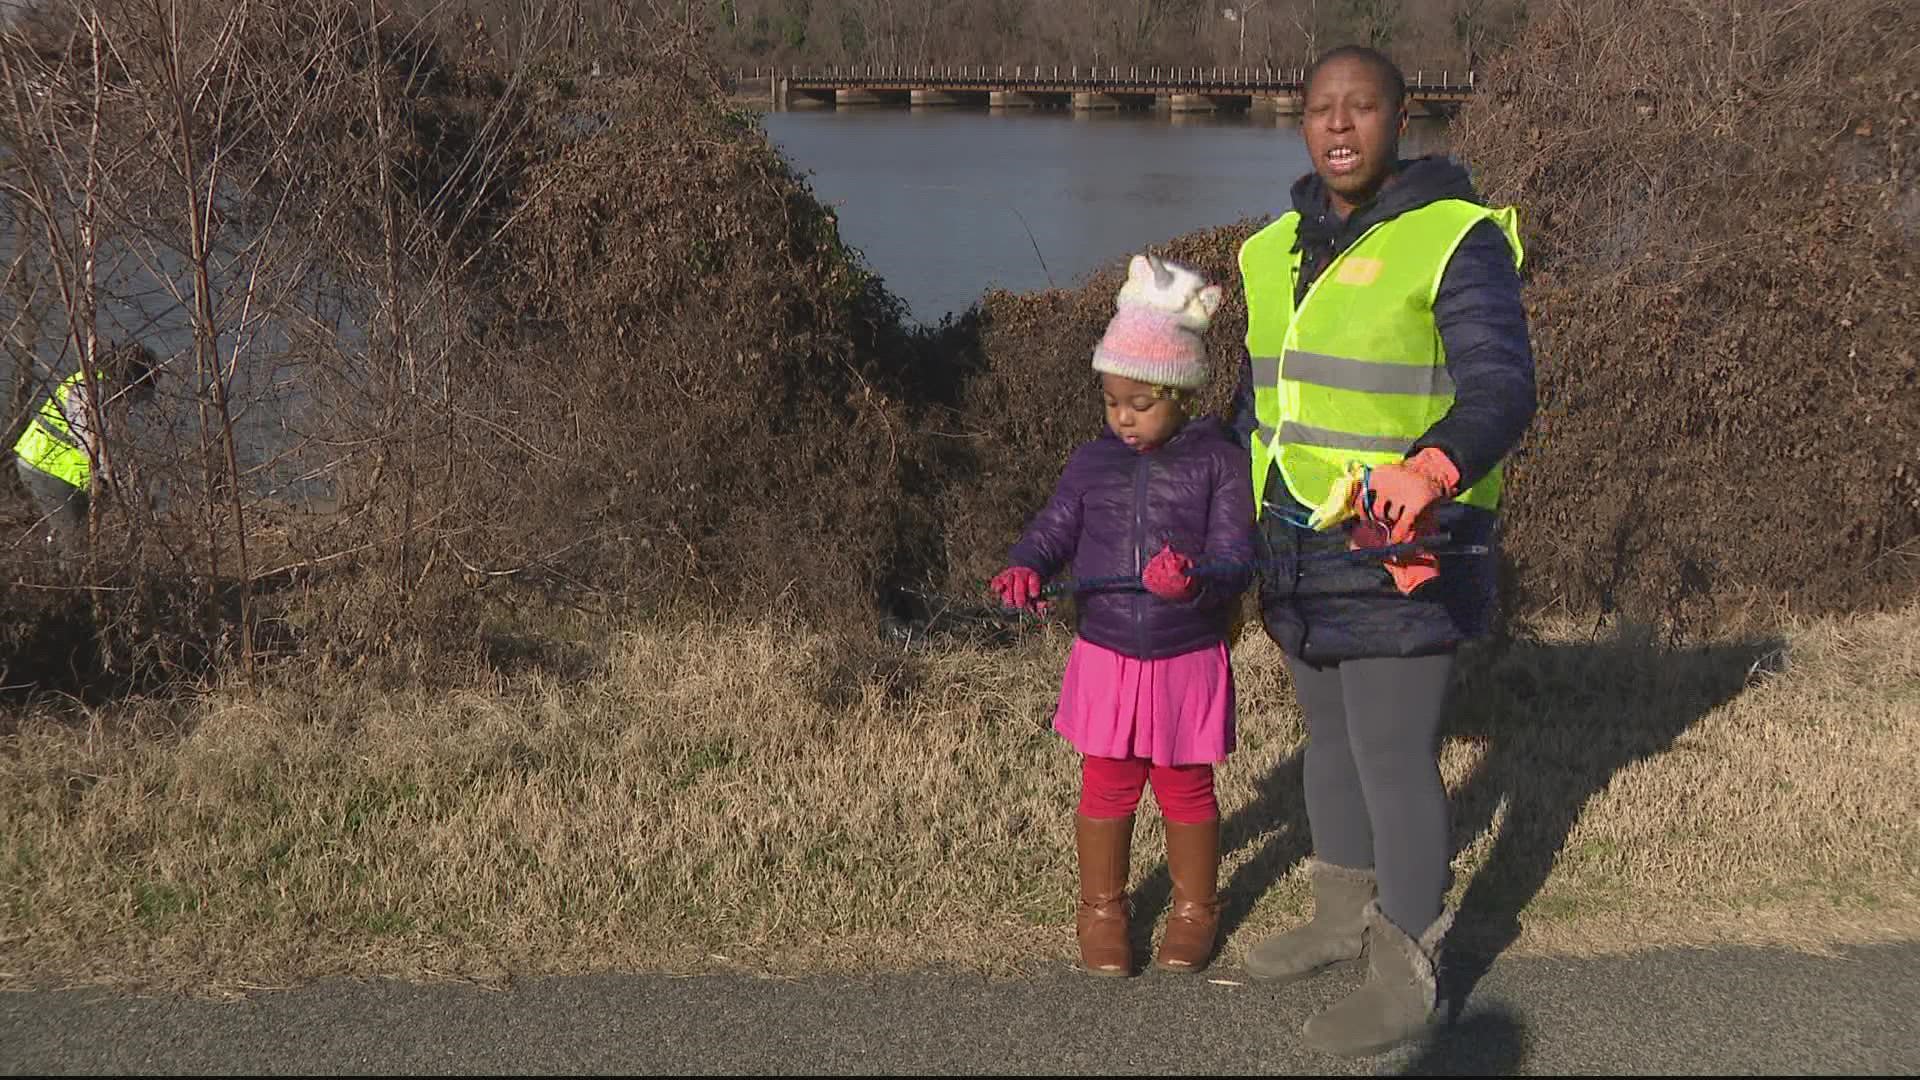 Volunteers with the Student Conservation Association and the National Park Service spent part of the MLK holiday cleaning up trash along the Anacostia River.